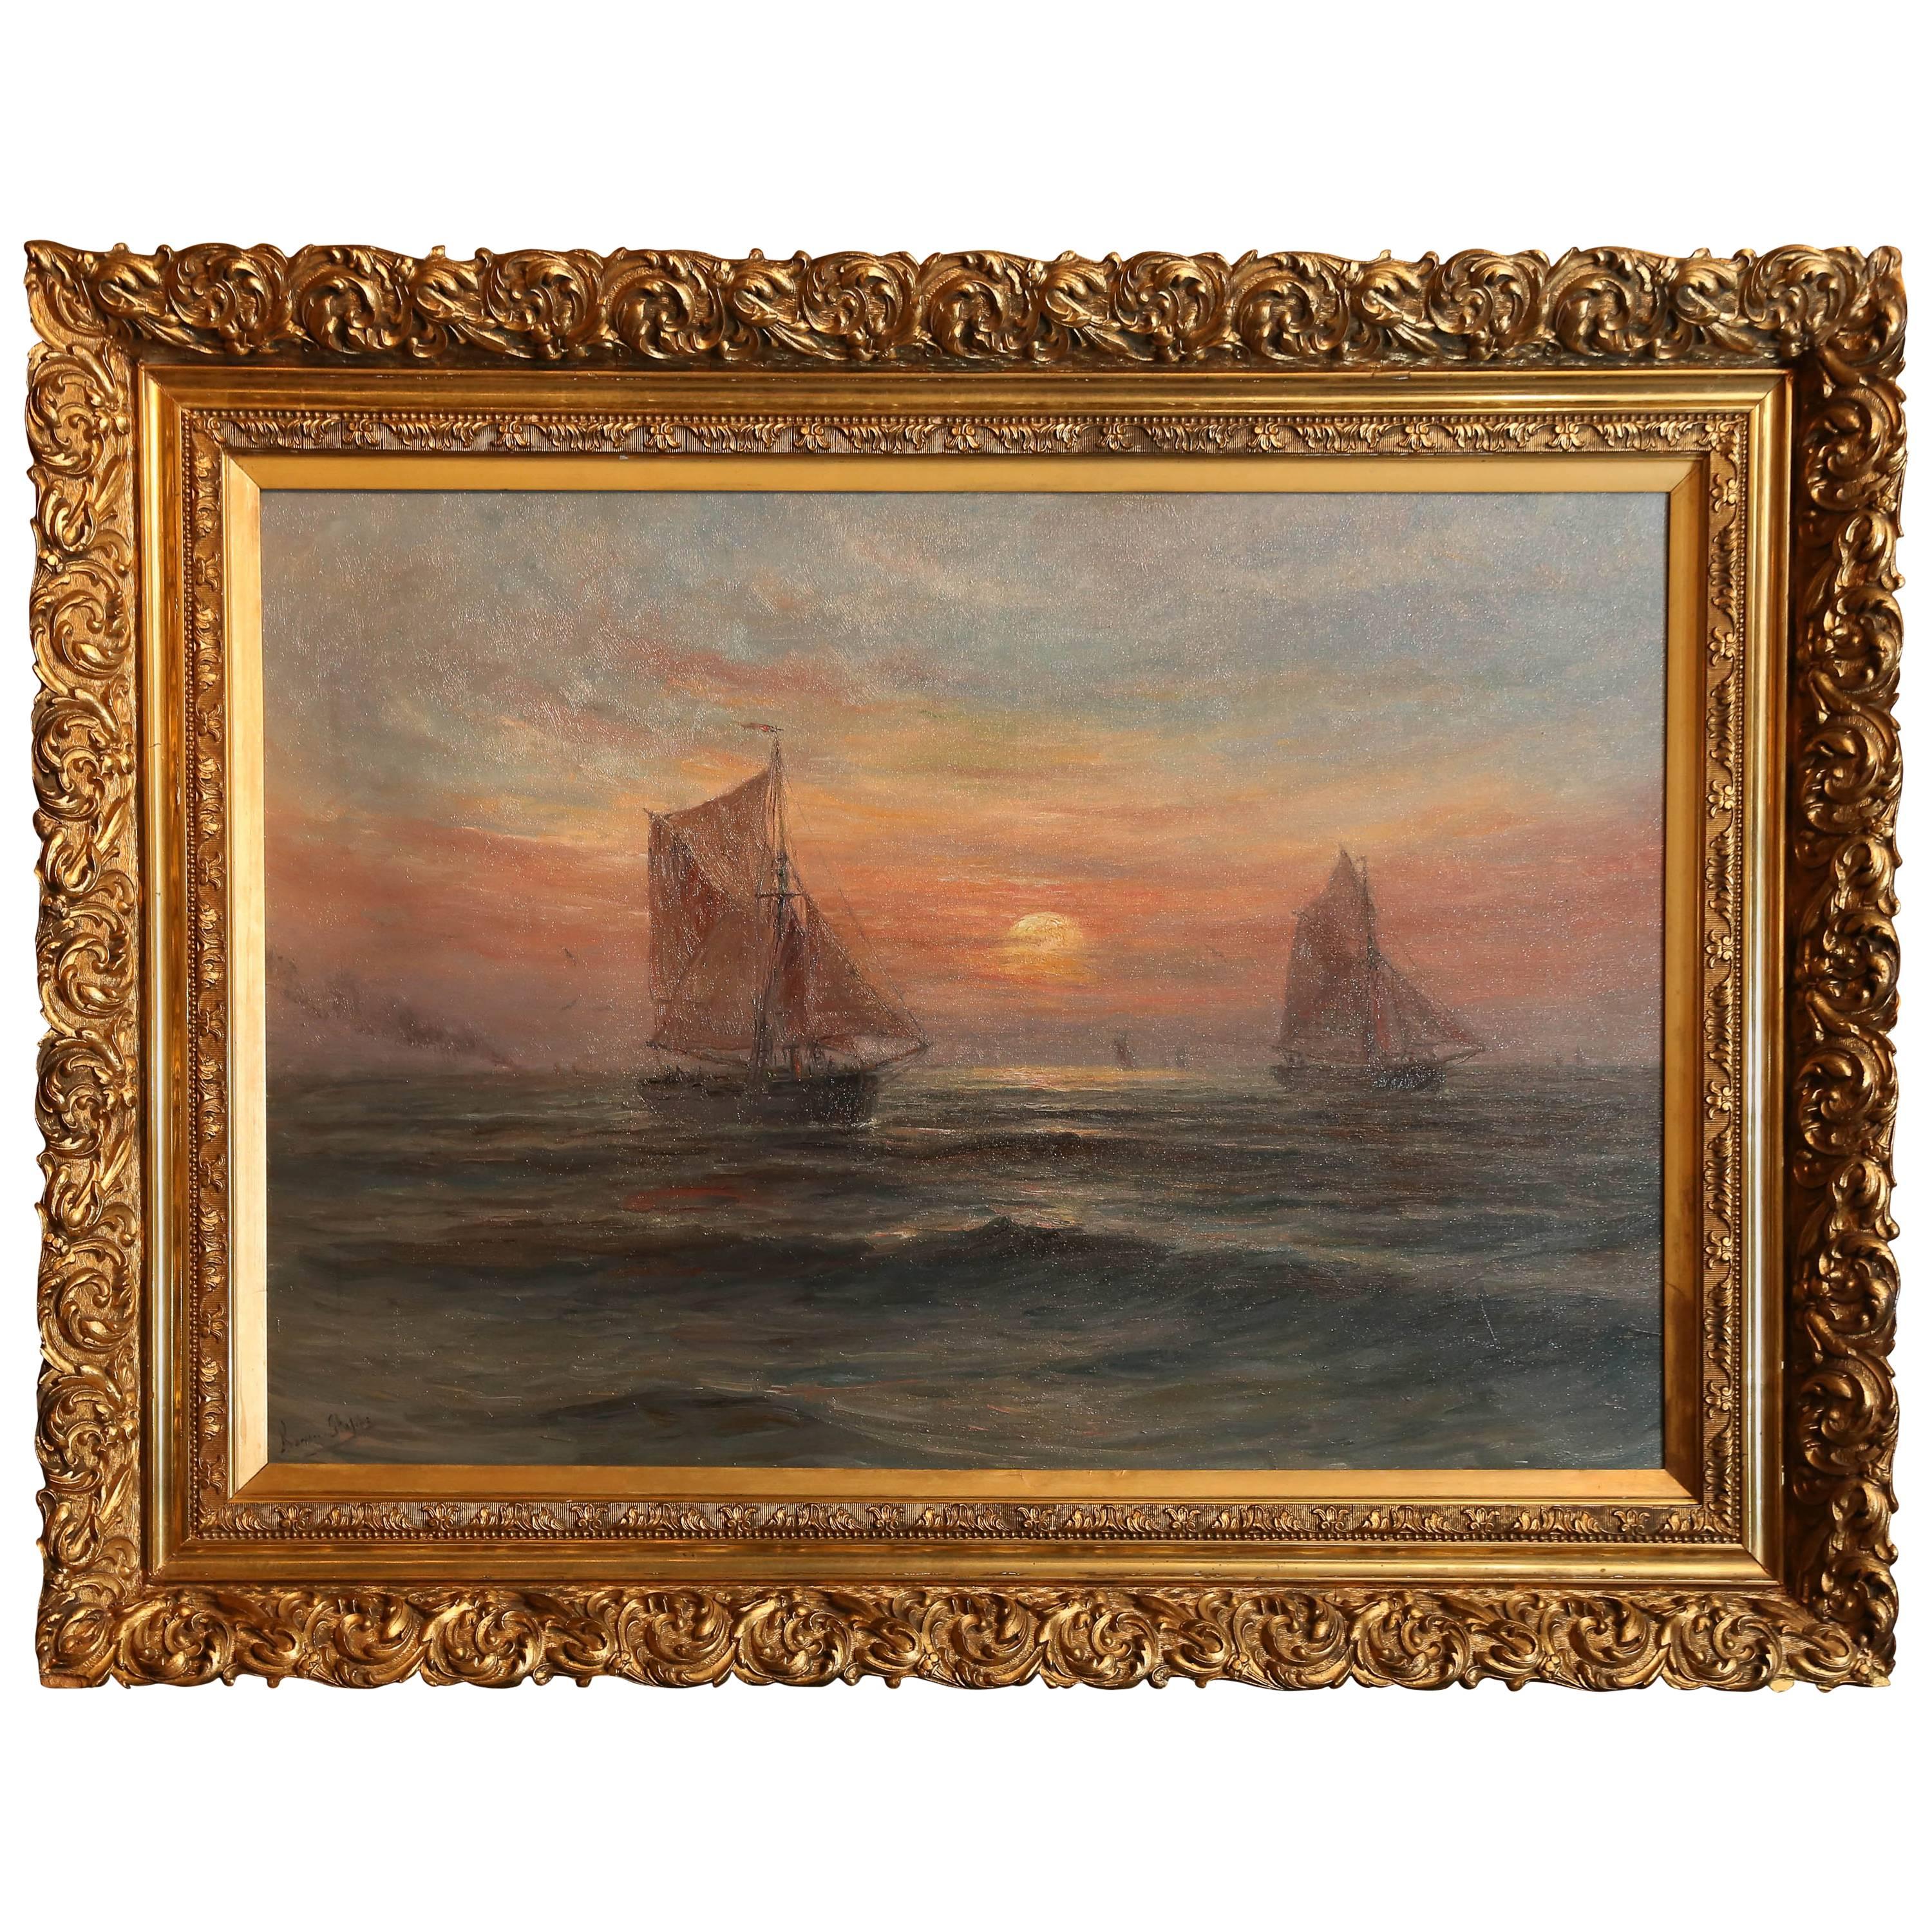 Oil on Canvas, Ships at Sunset Signed Lower Left "Romain Steppe" For Sale